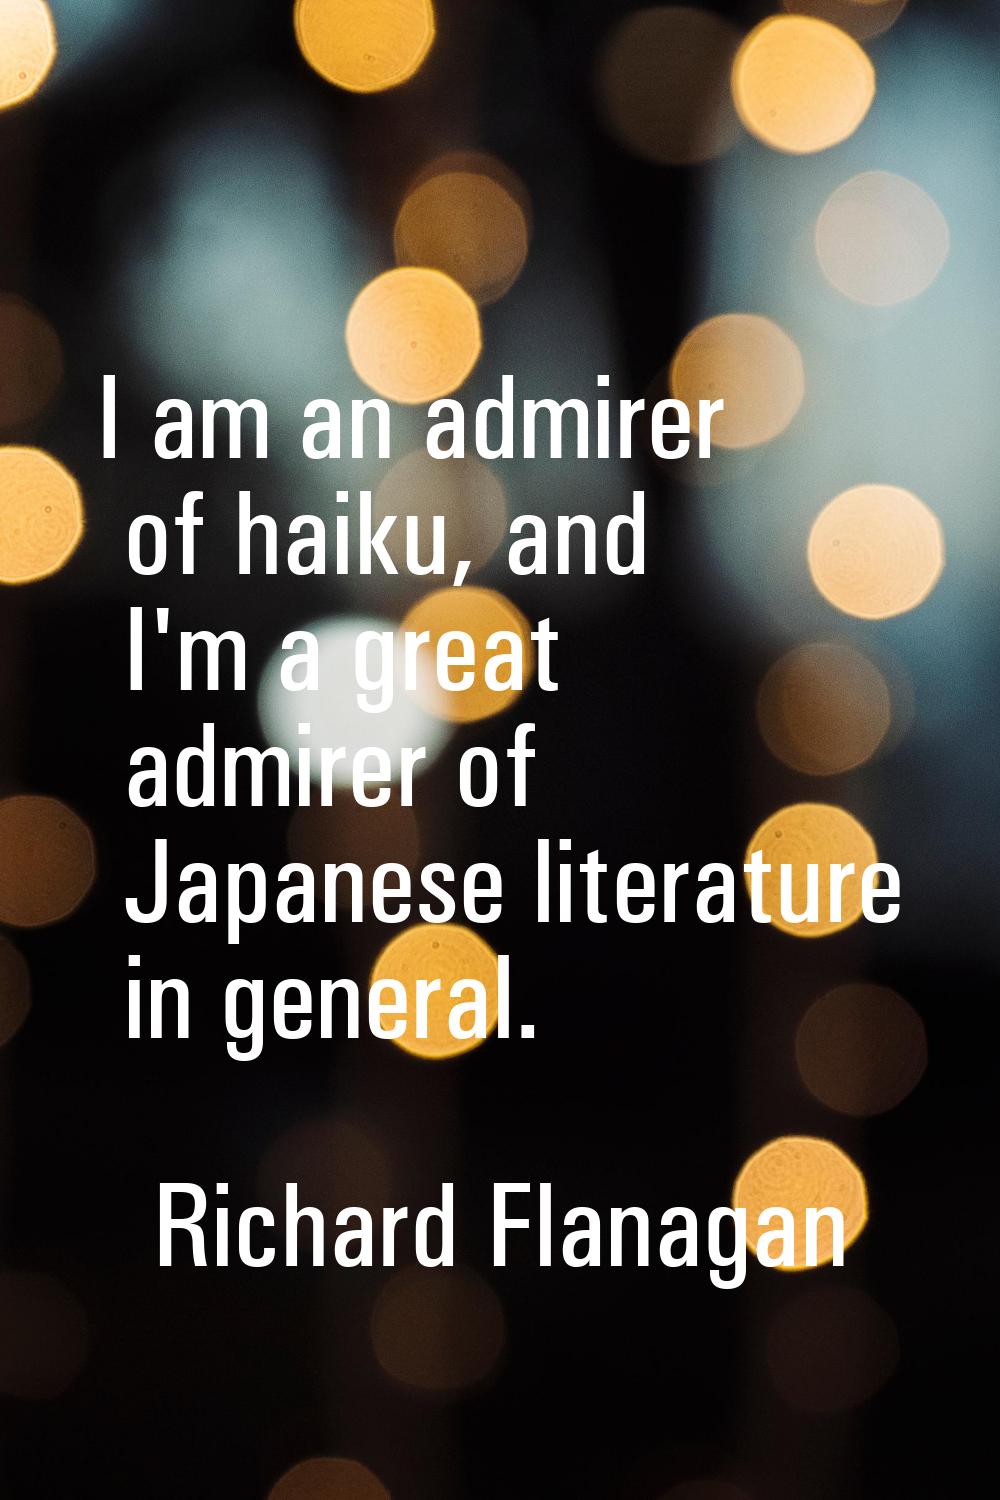 I am an admirer of haiku, and I'm a great admirer of Japanese literature in general.